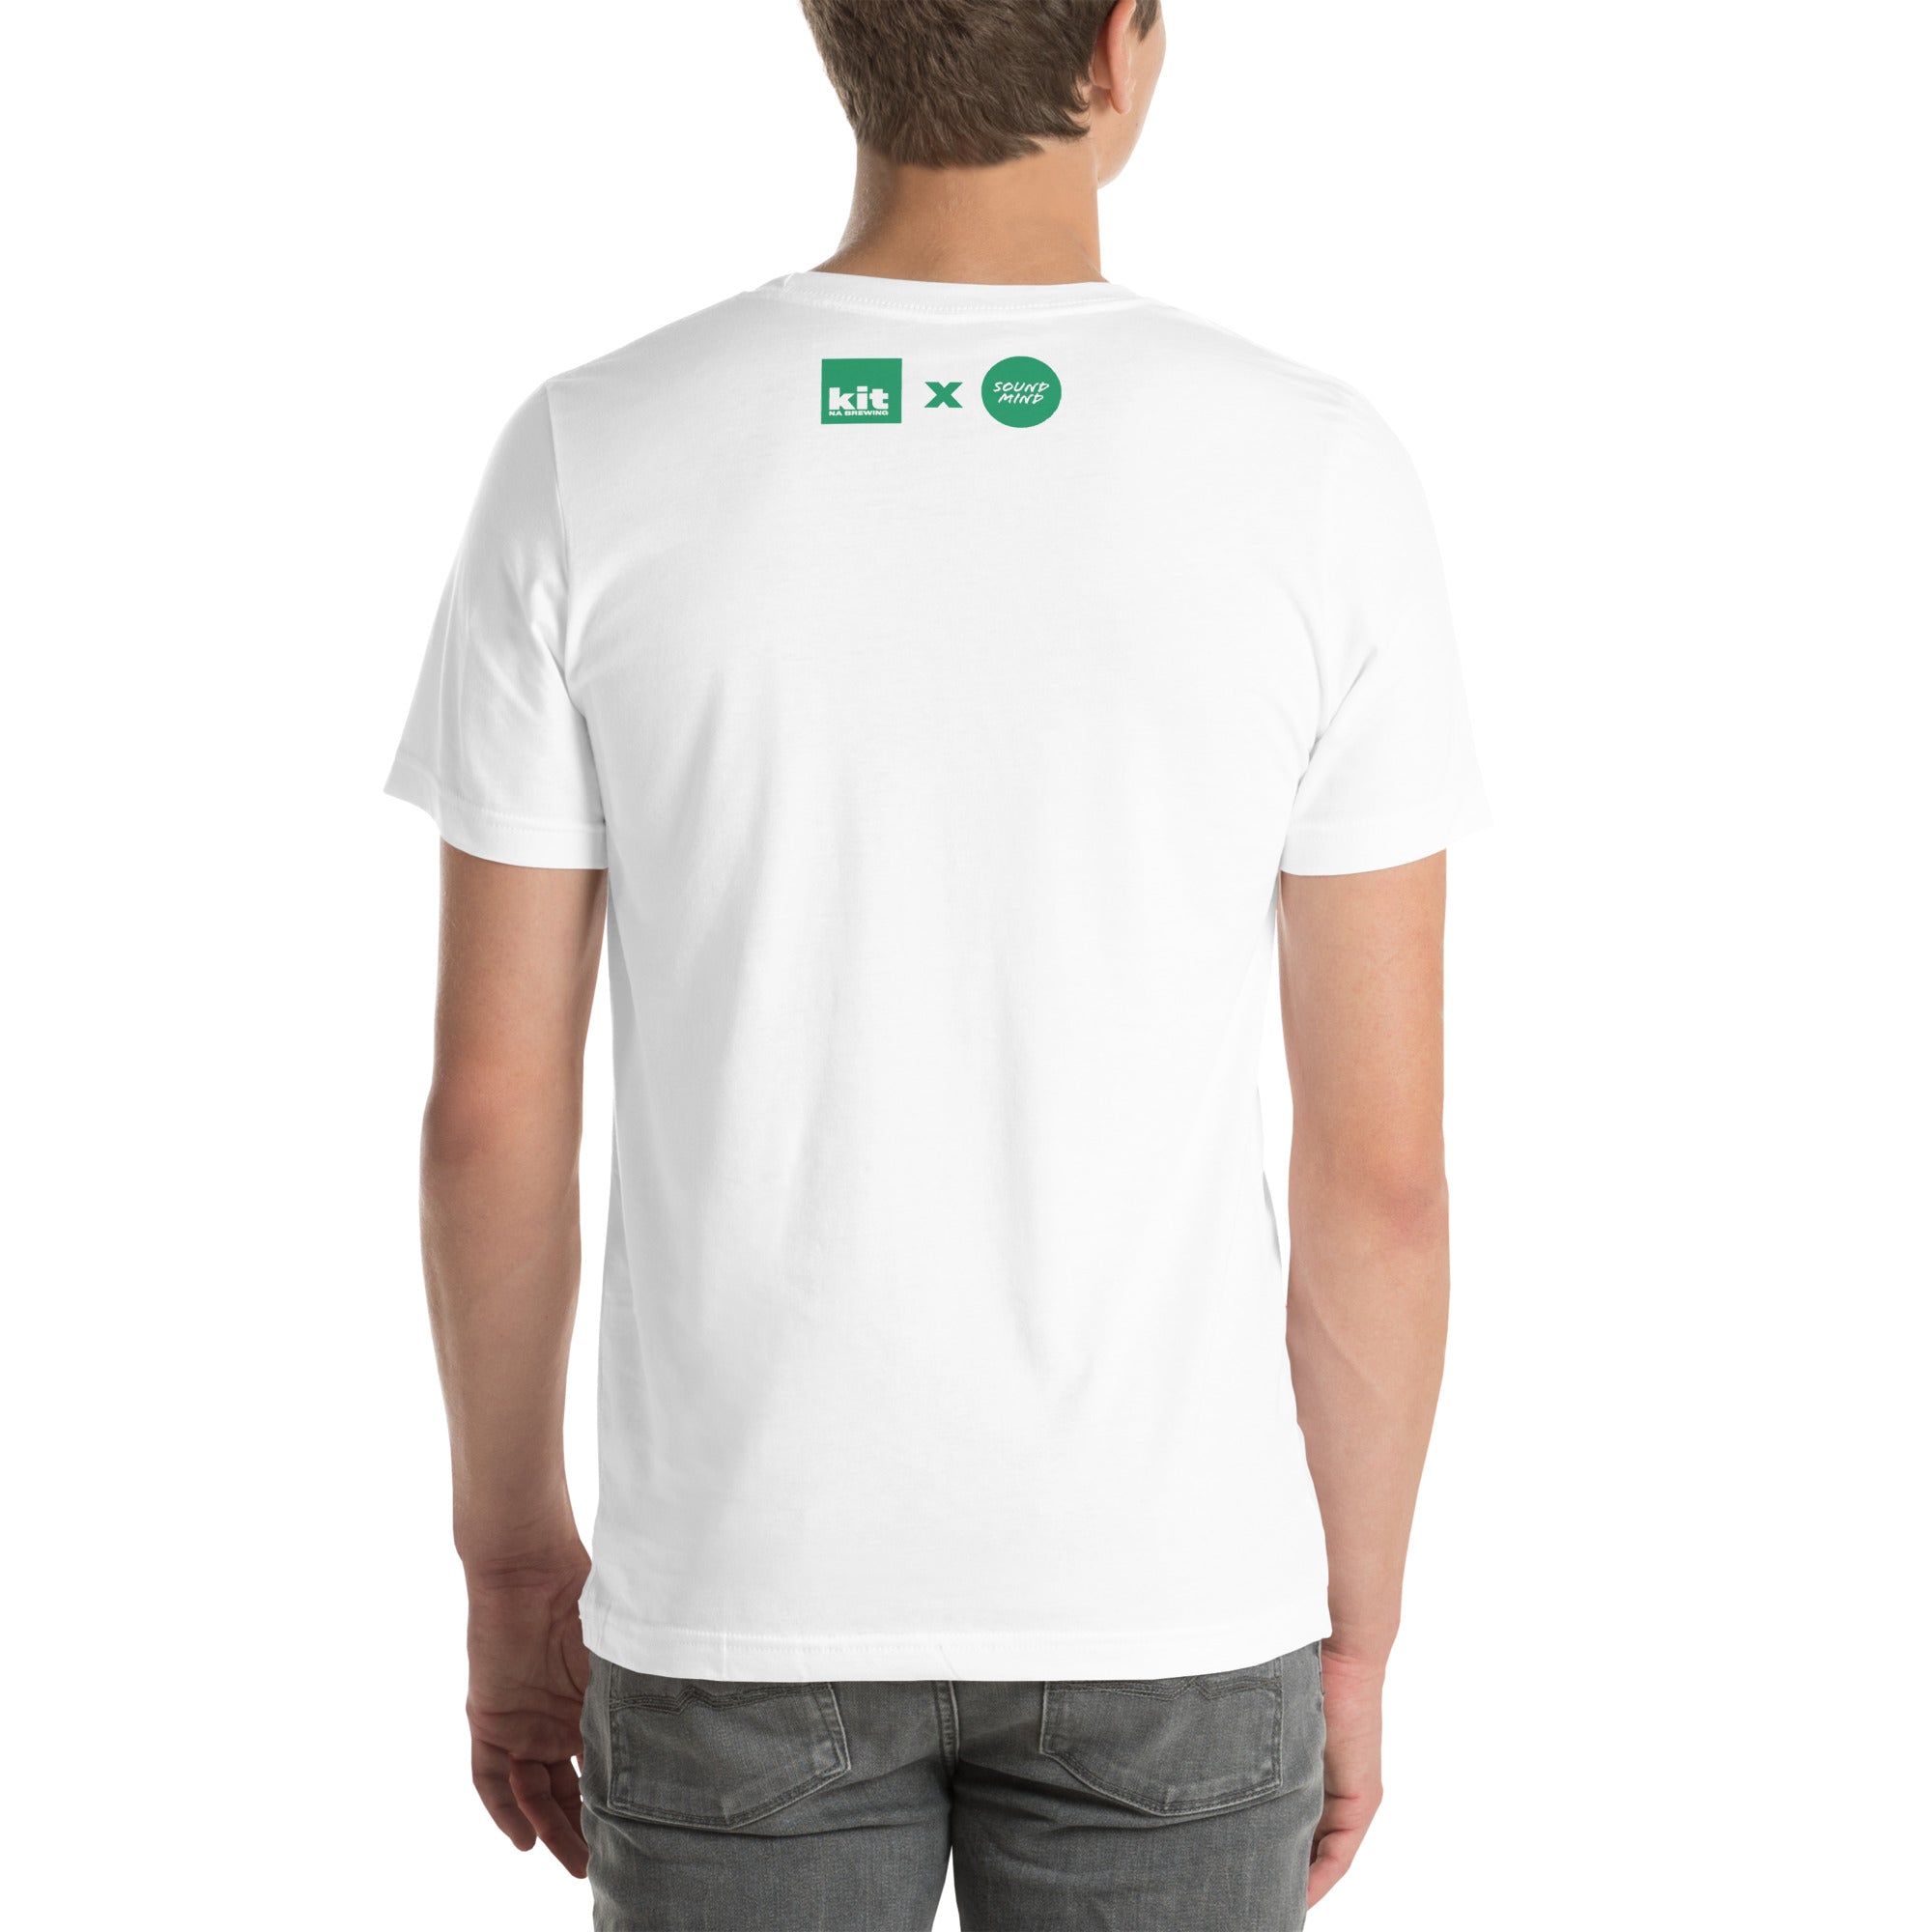 Tuned In for Mental Health T-shirt